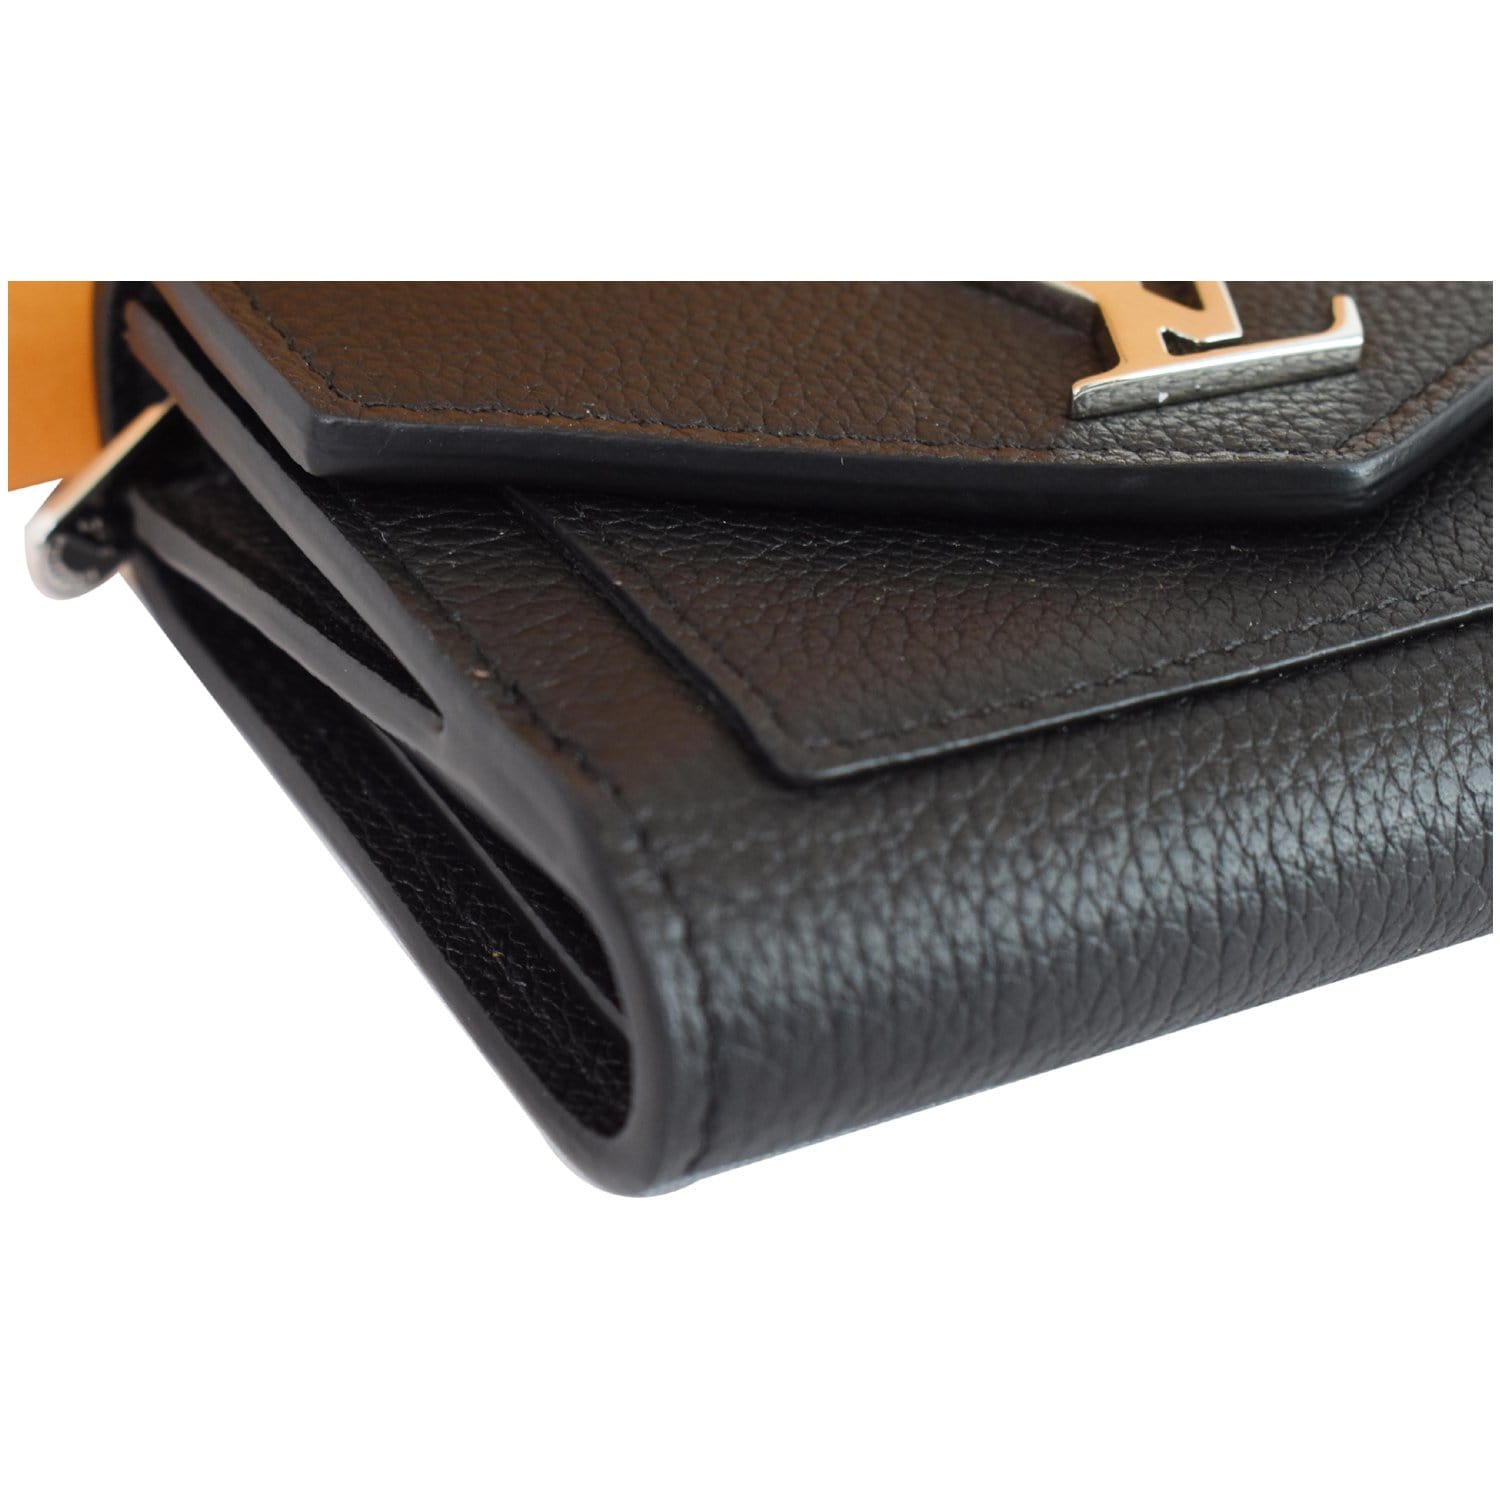 MyLockMe Compact Wallet Lockme - Wallets and Small Leather Goods